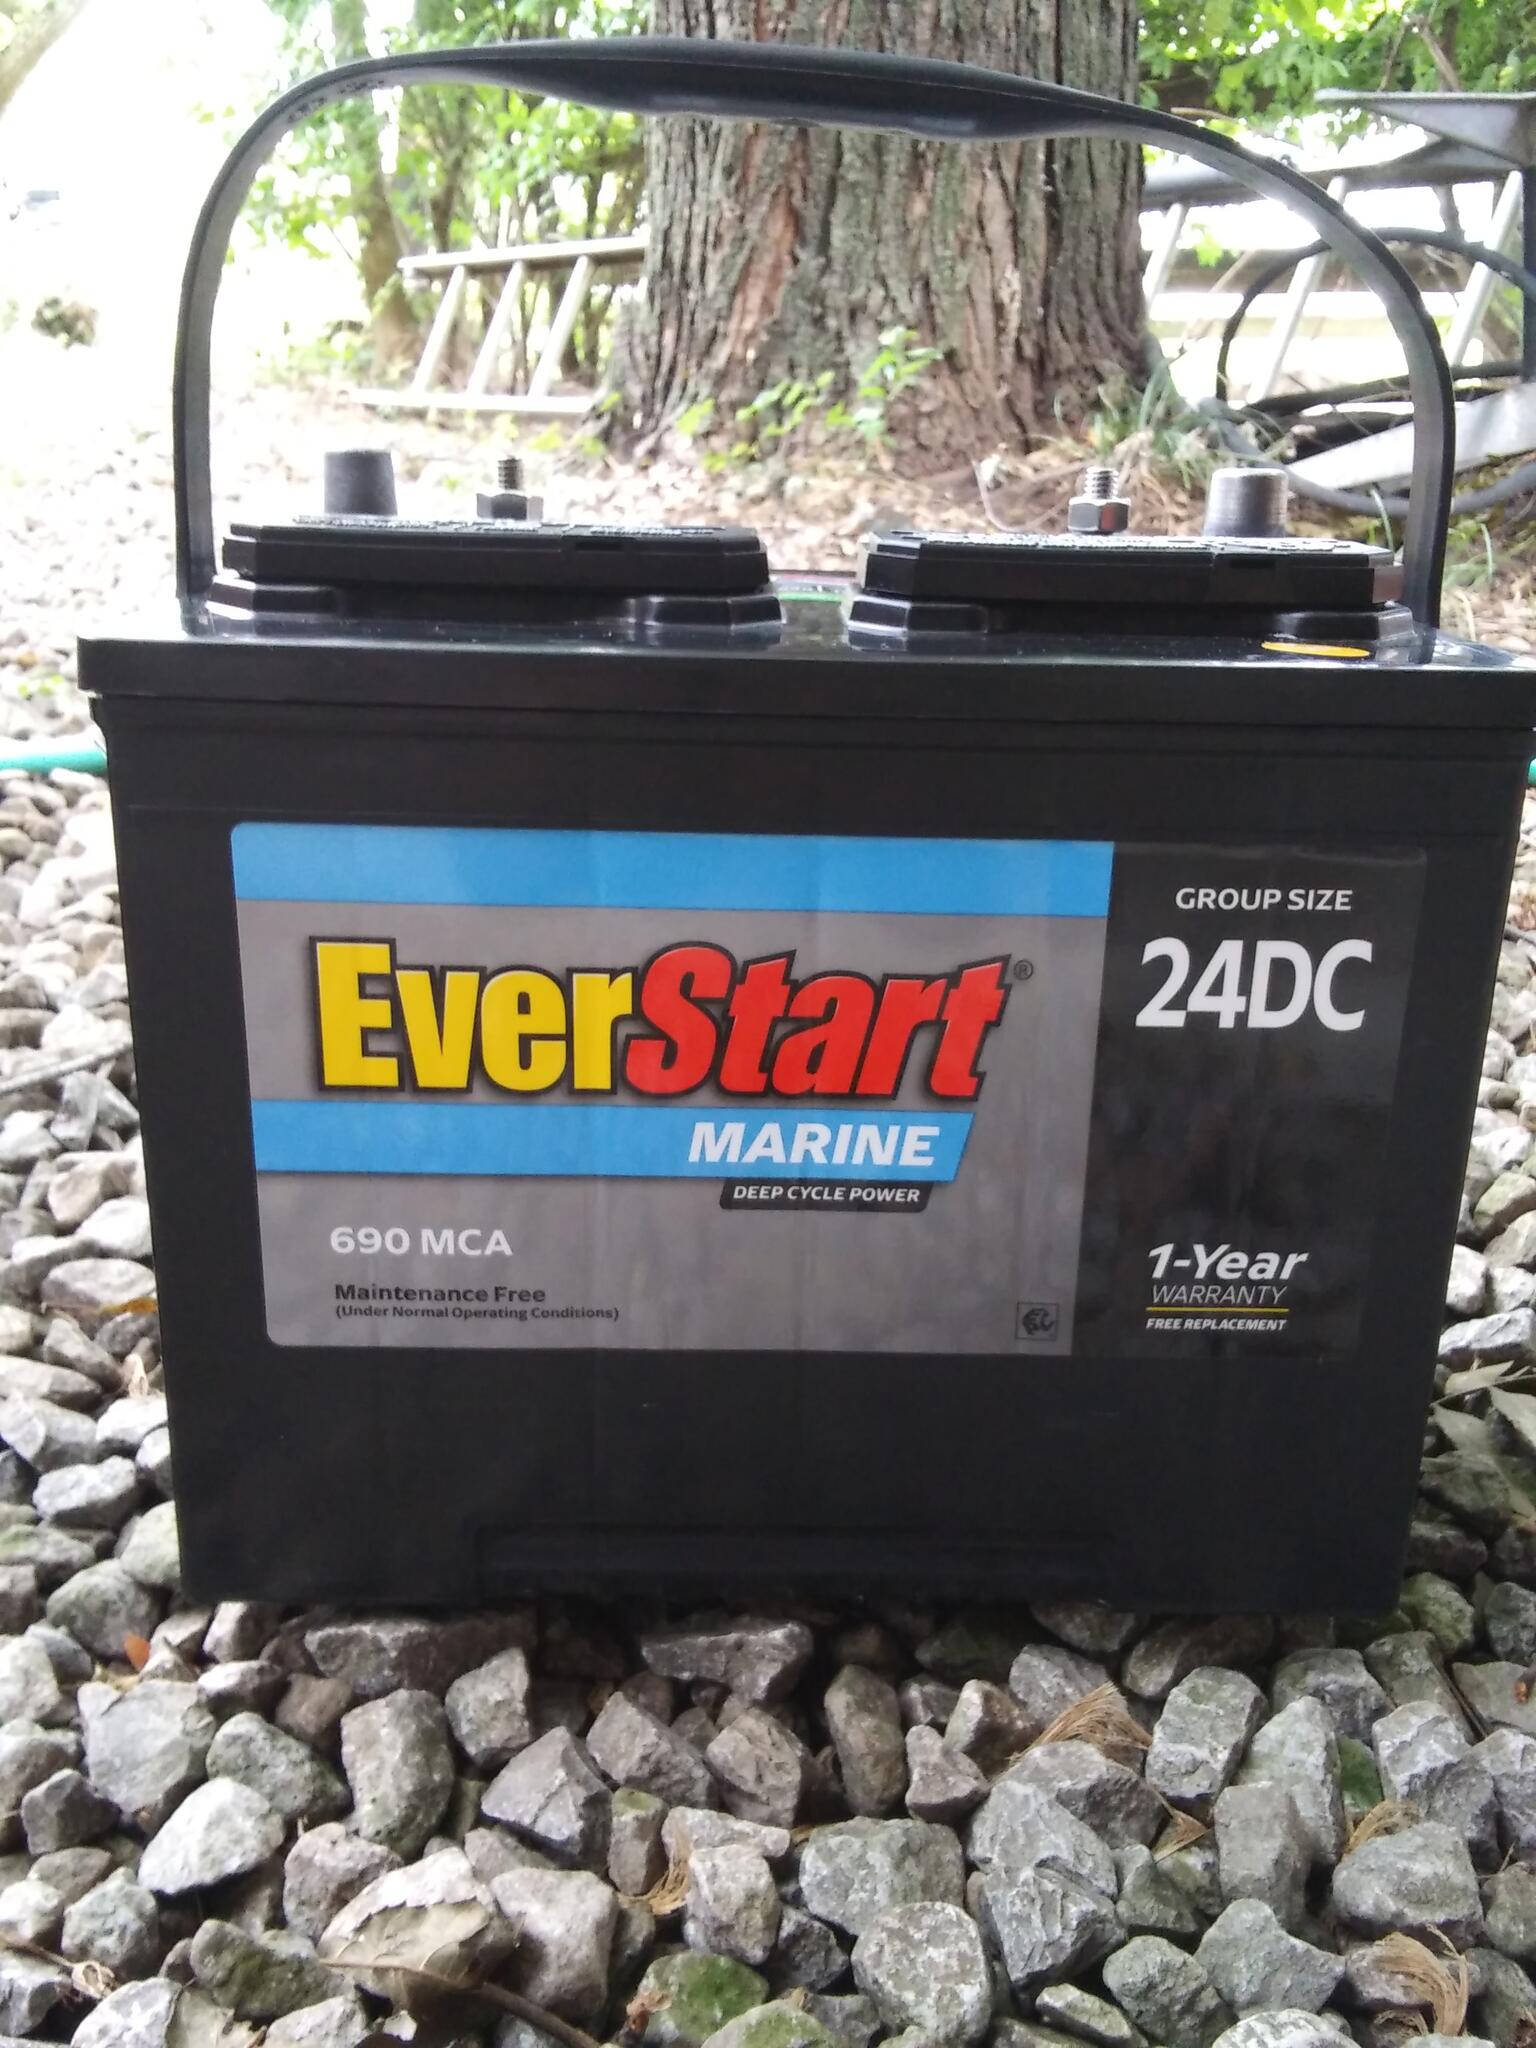 EverStart Marine Deep Cycle Battery for $60 in Lakeside Marblehead, OH ...